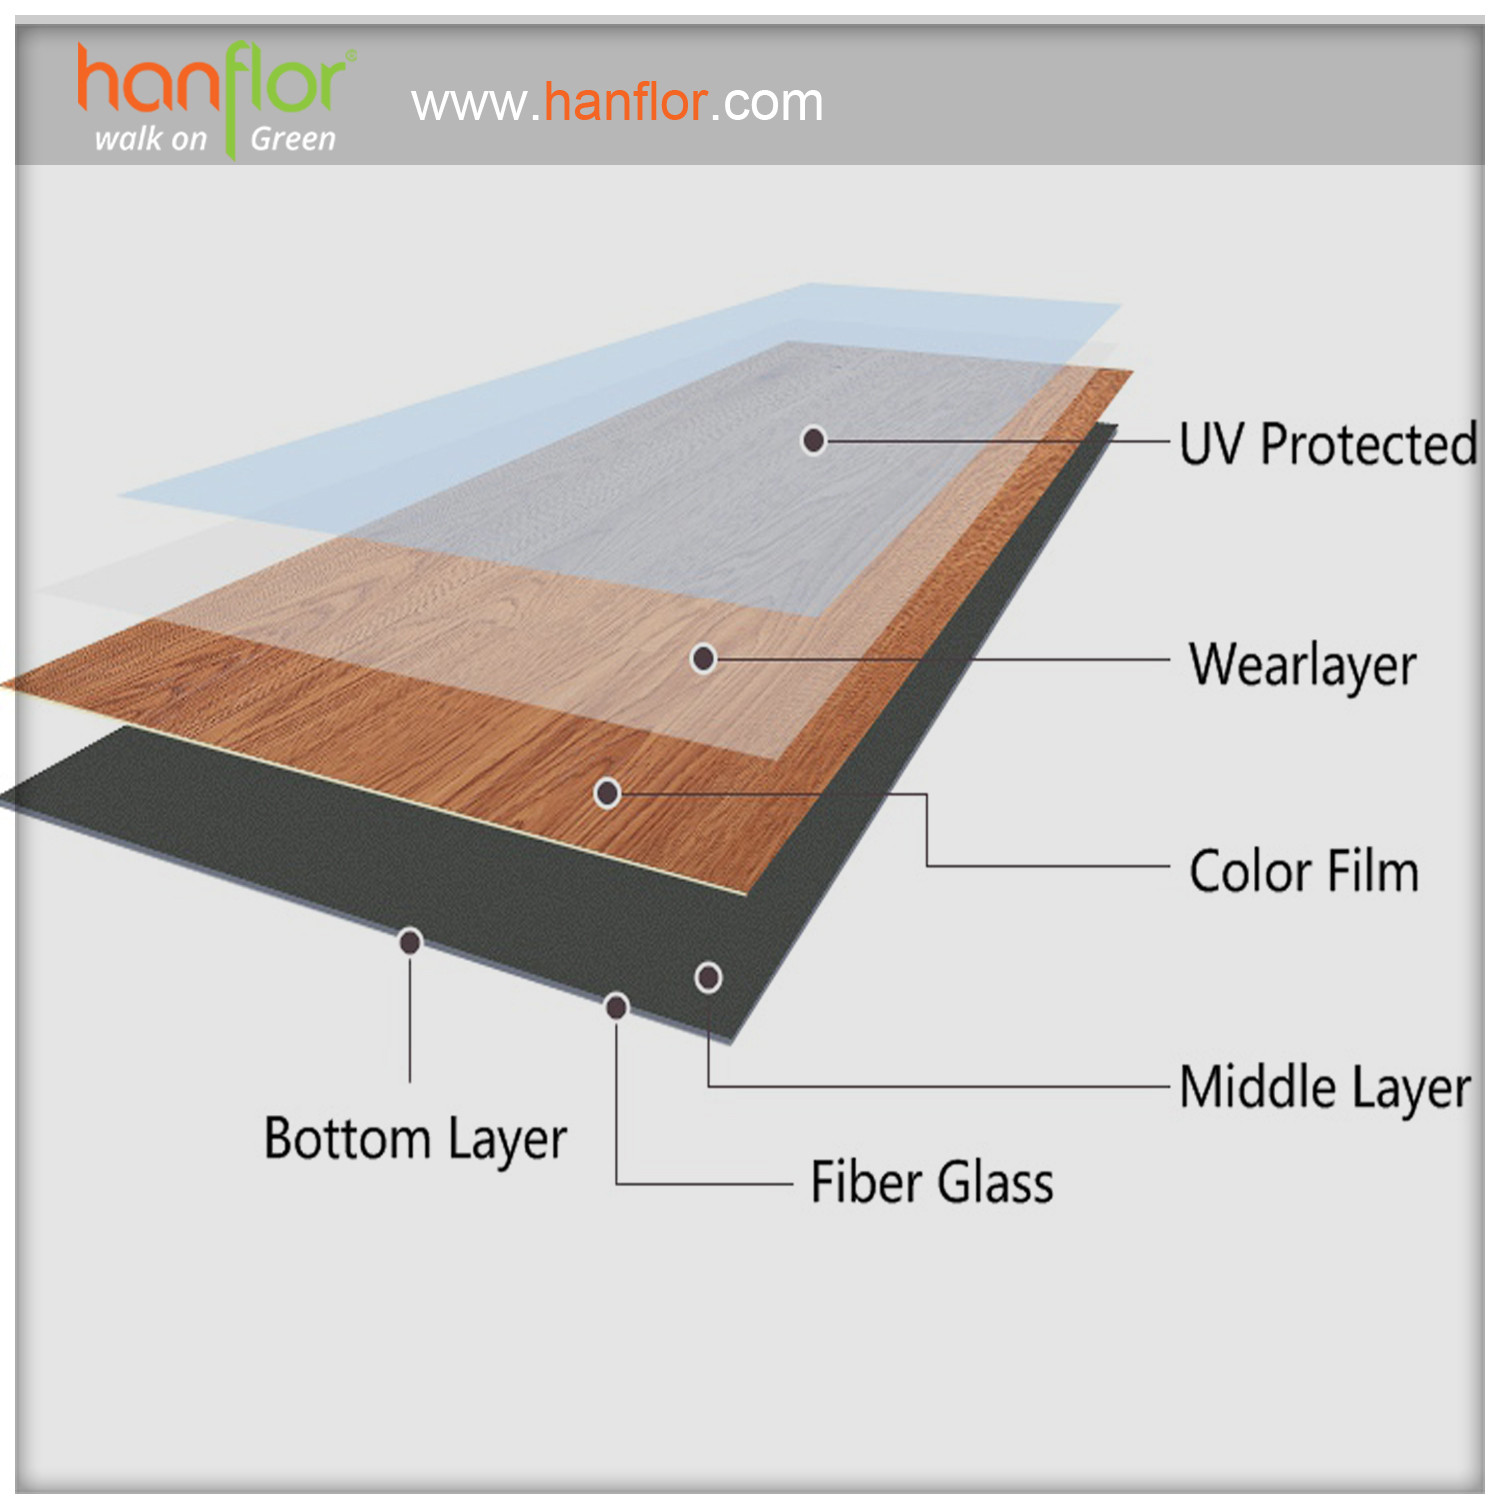 4.product Structure: UV protected, UV coating, UV, wearlayer, wear layer, wearlayers, color flim, Middle layer, fiber glass, bottom layer, day back, pvc flooring with above structure, make sure the quality is good. plastic floor,pvc floor, Vinyl floor, plastic flooring, pvc flooring, Vinyl flooring, pvc plank, vinyl plank, pvc tile, vinyl tile, click vinyl flooring, interlocking vinyl flooring, unilin click flooring, unilin click vinyl flooring, click pvc flooring, interlocking pvc flooring, unilin click vinyl flooring, unilin click pvc flooring